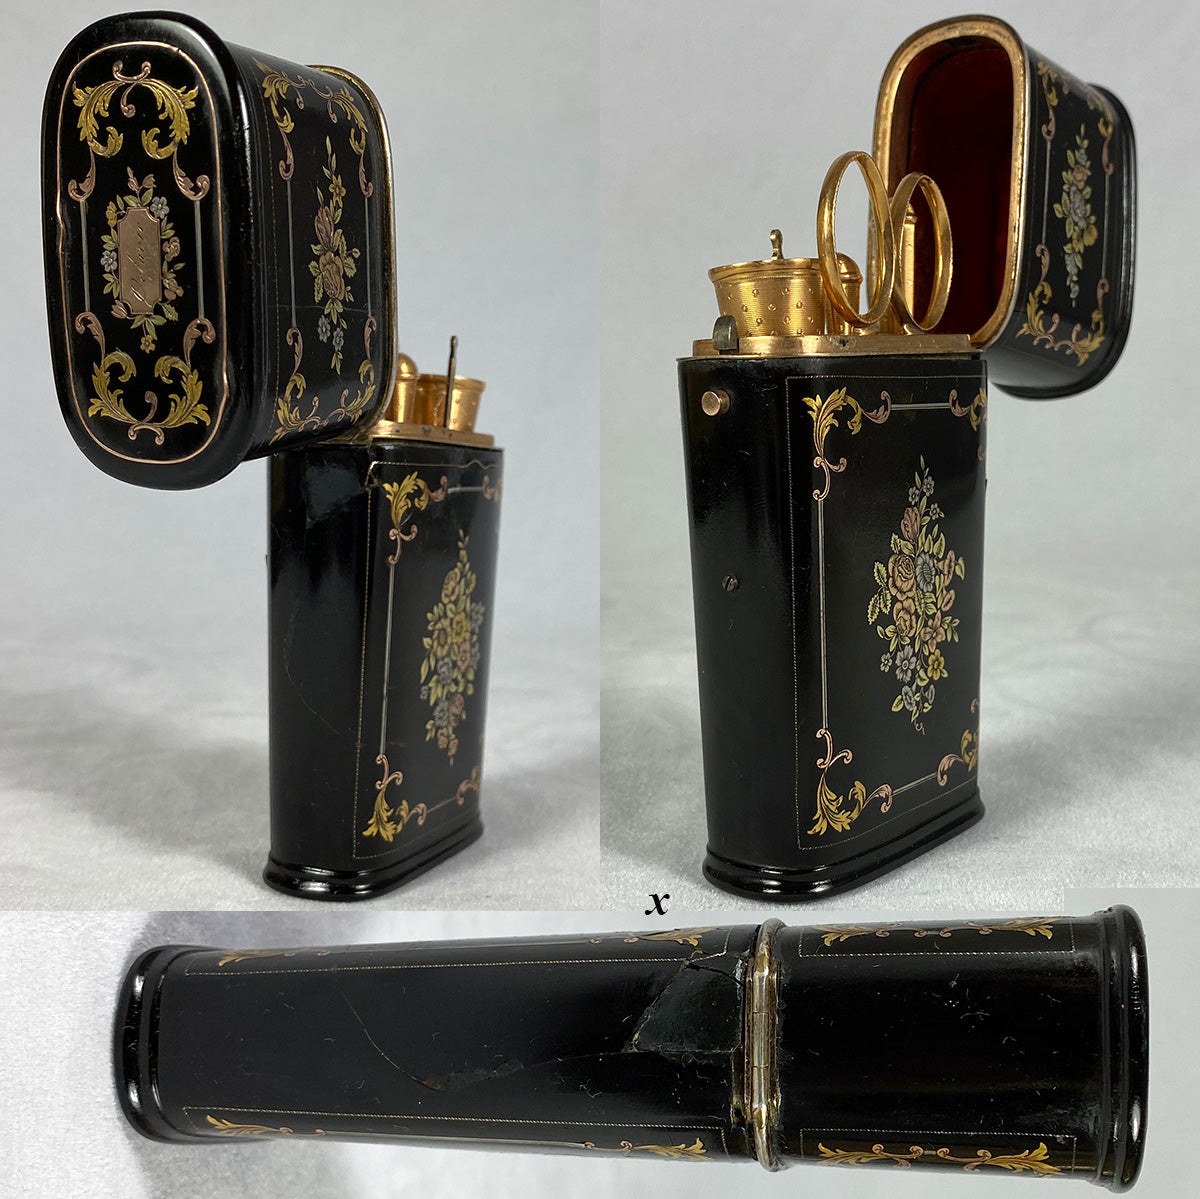 Fine Antique French Sewing Etui, Tortoise Shell Pique Case with 18k Gold Sewing Tools, Scissors, Thimble, etc. c.1830